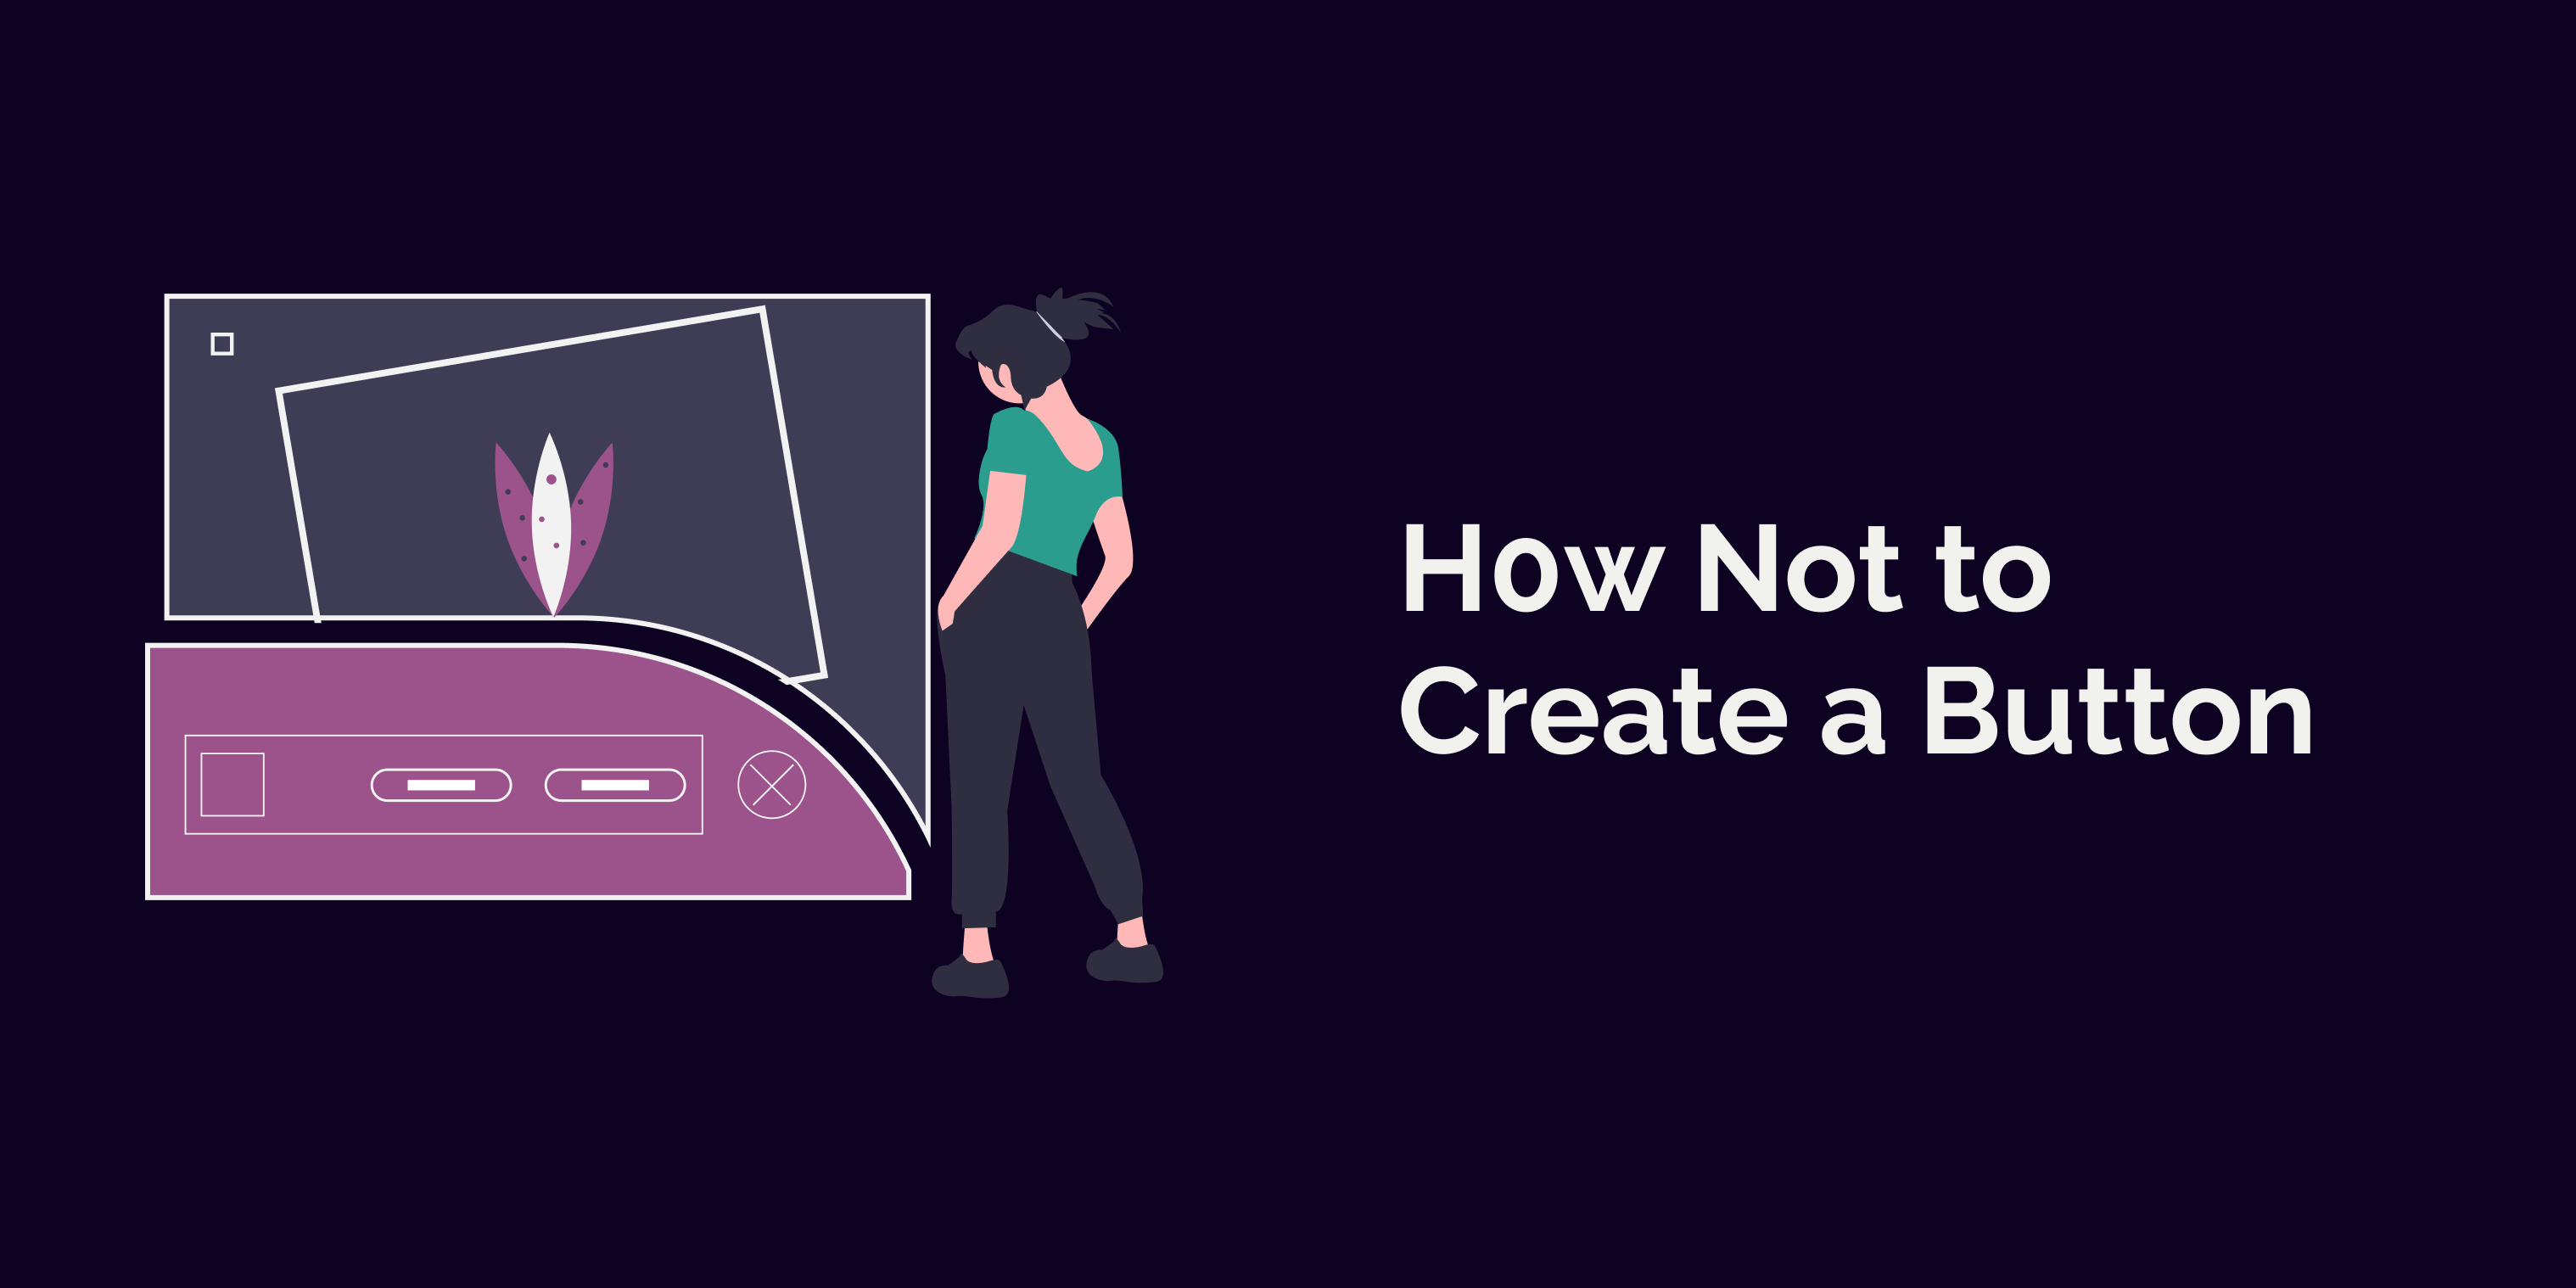 How not to create a button. Illustration has a woman standing and looking at UI with couple of buttons.